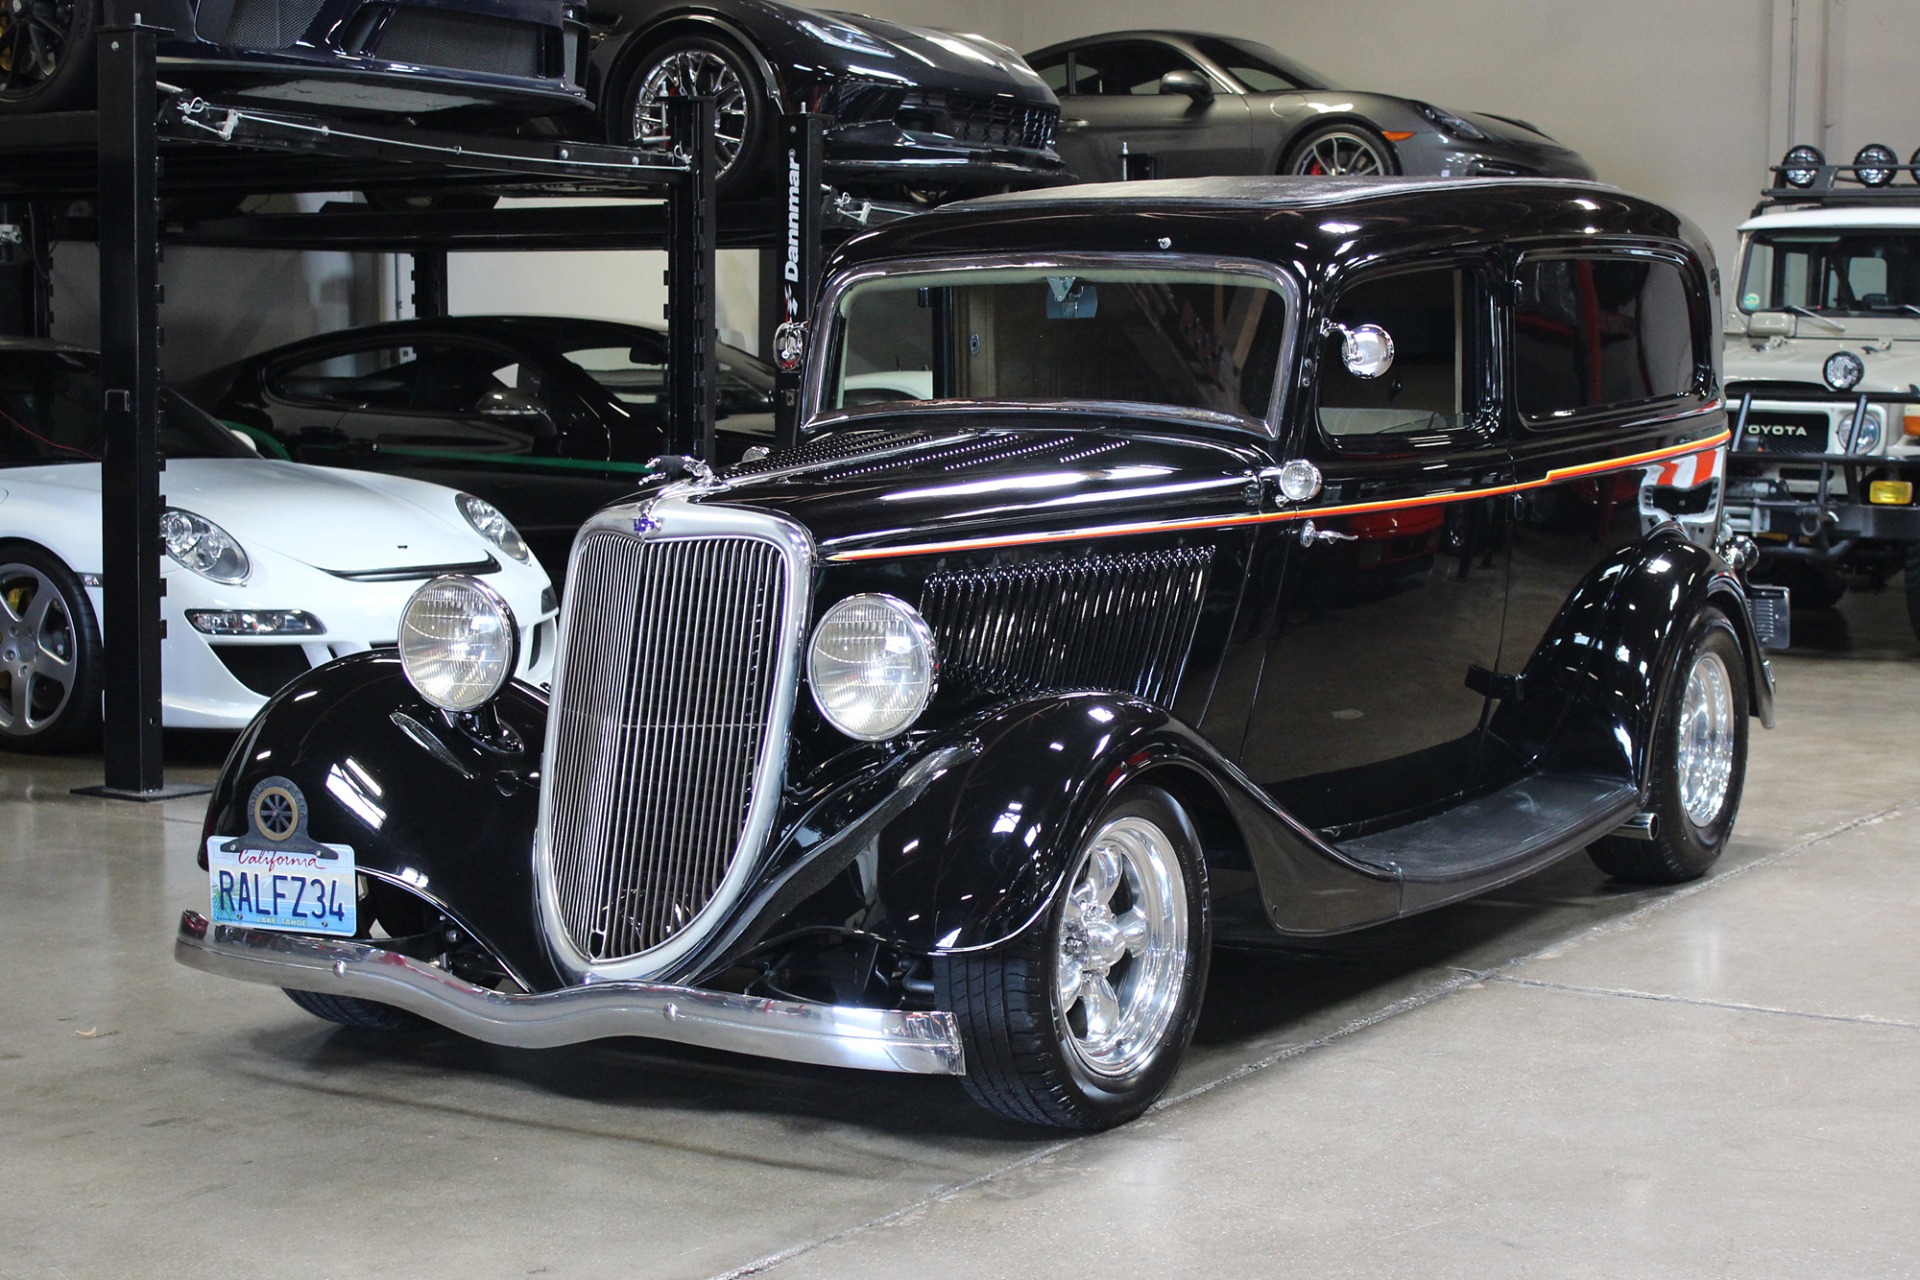 Used 1934 Ford Sedan delivery For Sale ($59,995) | San Francisco ...